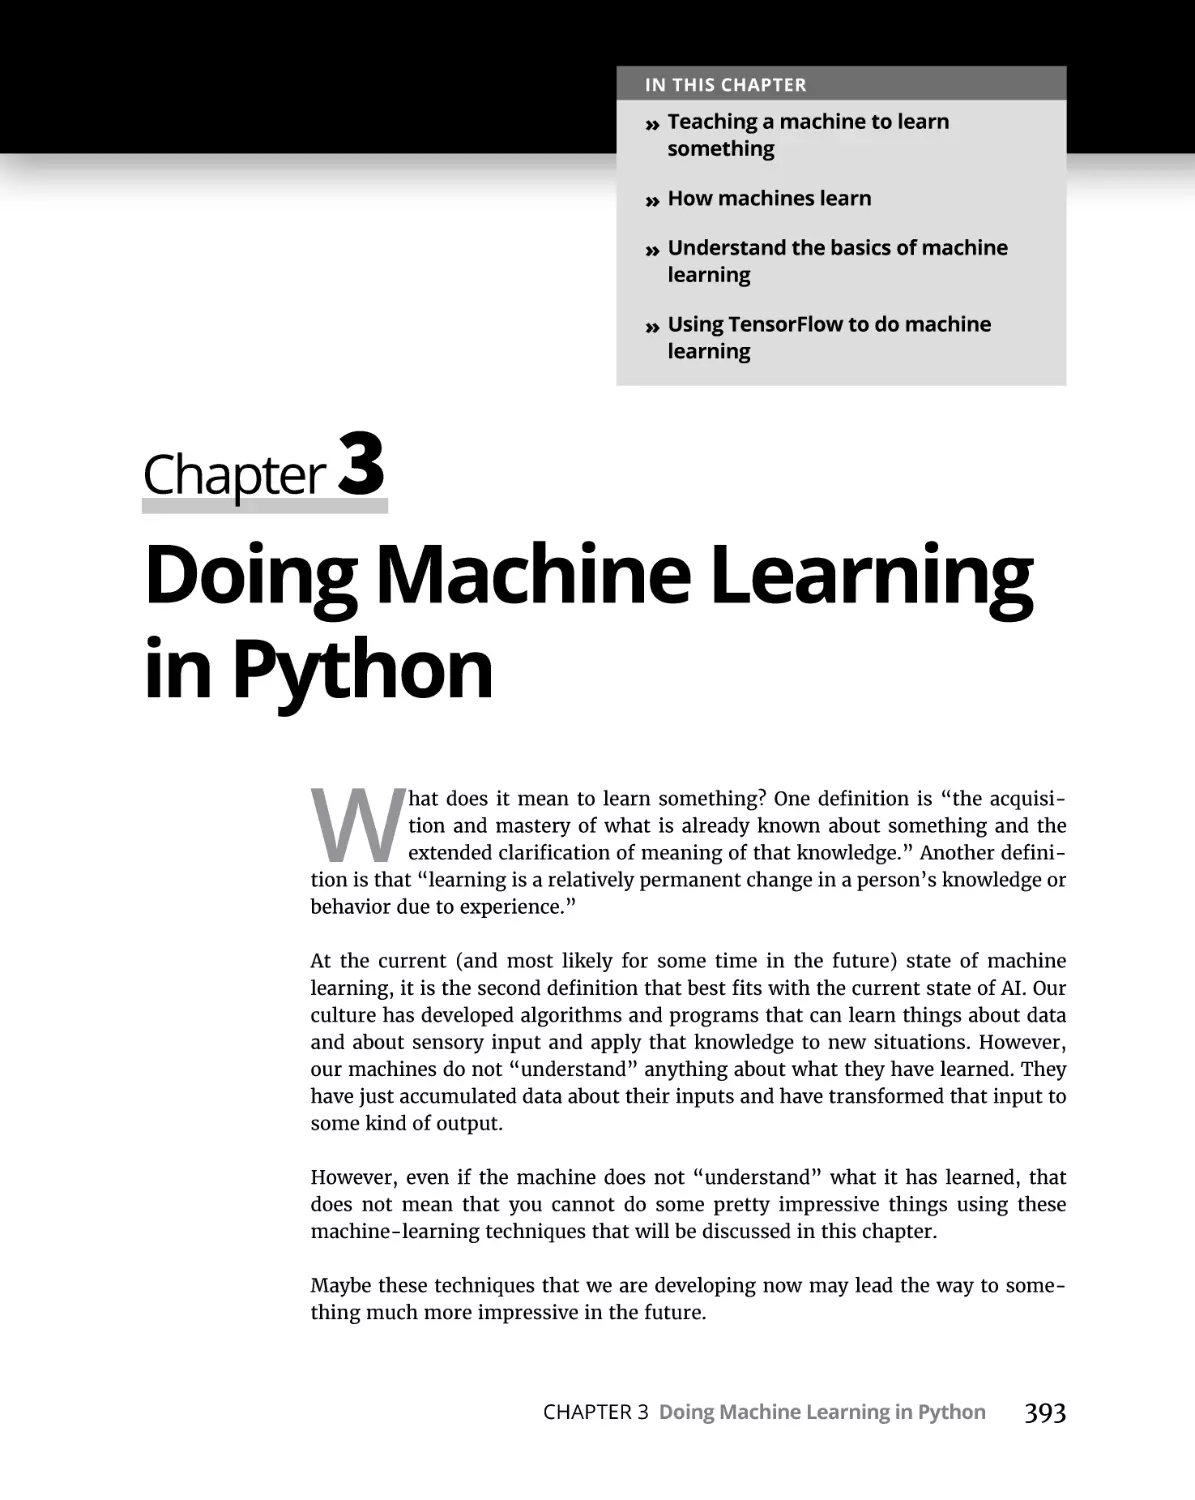 Chapter 3 Doing Machine Learning in Python